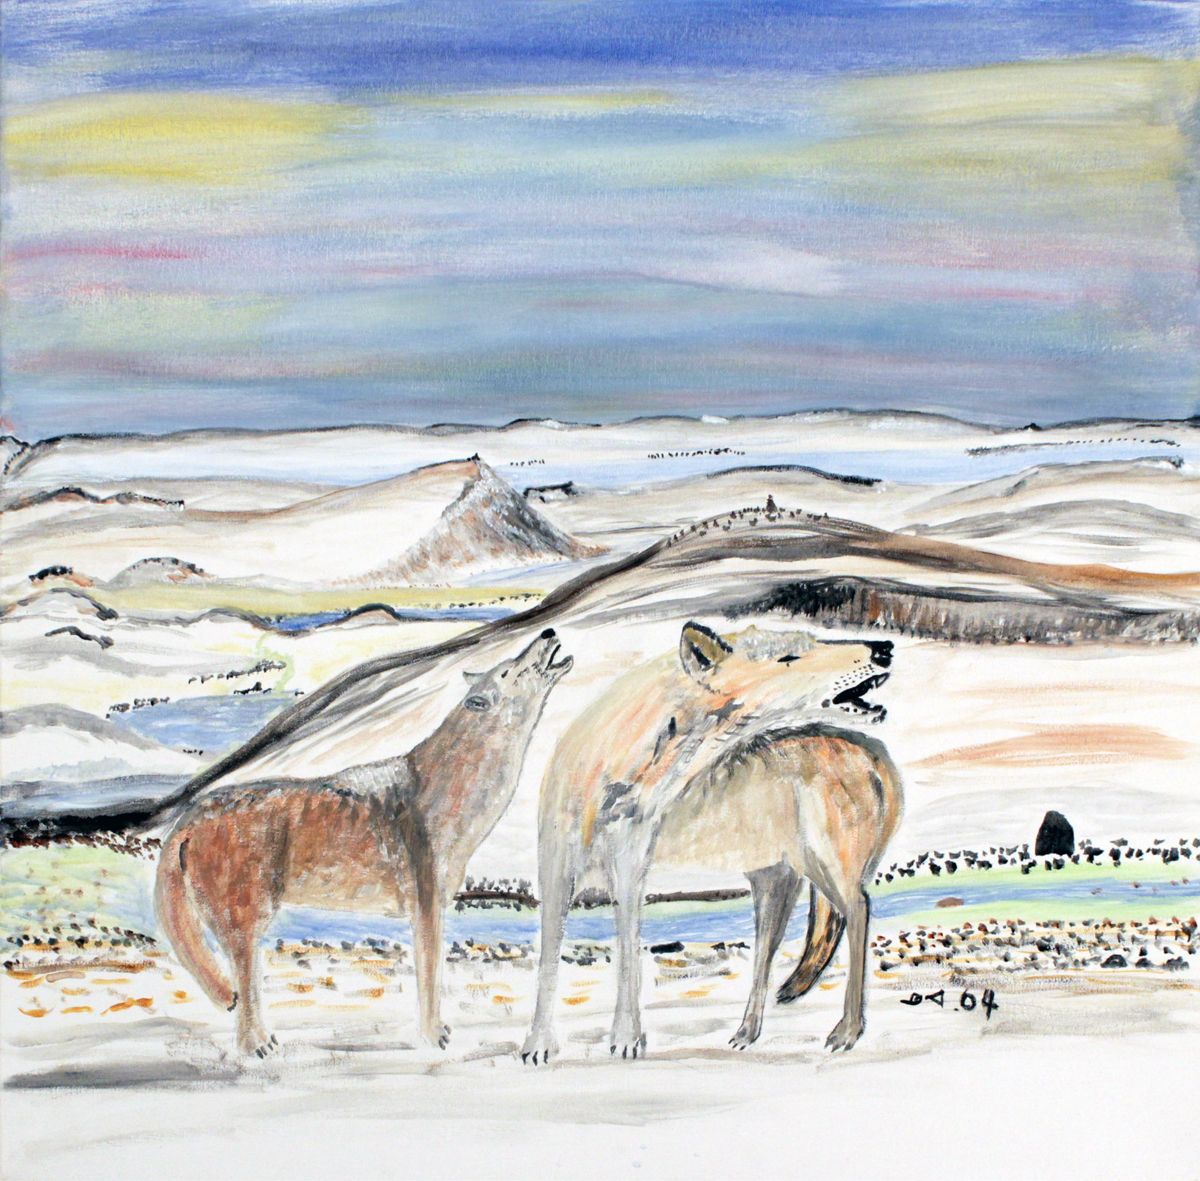 WINTER SCENE WITH WOLVES